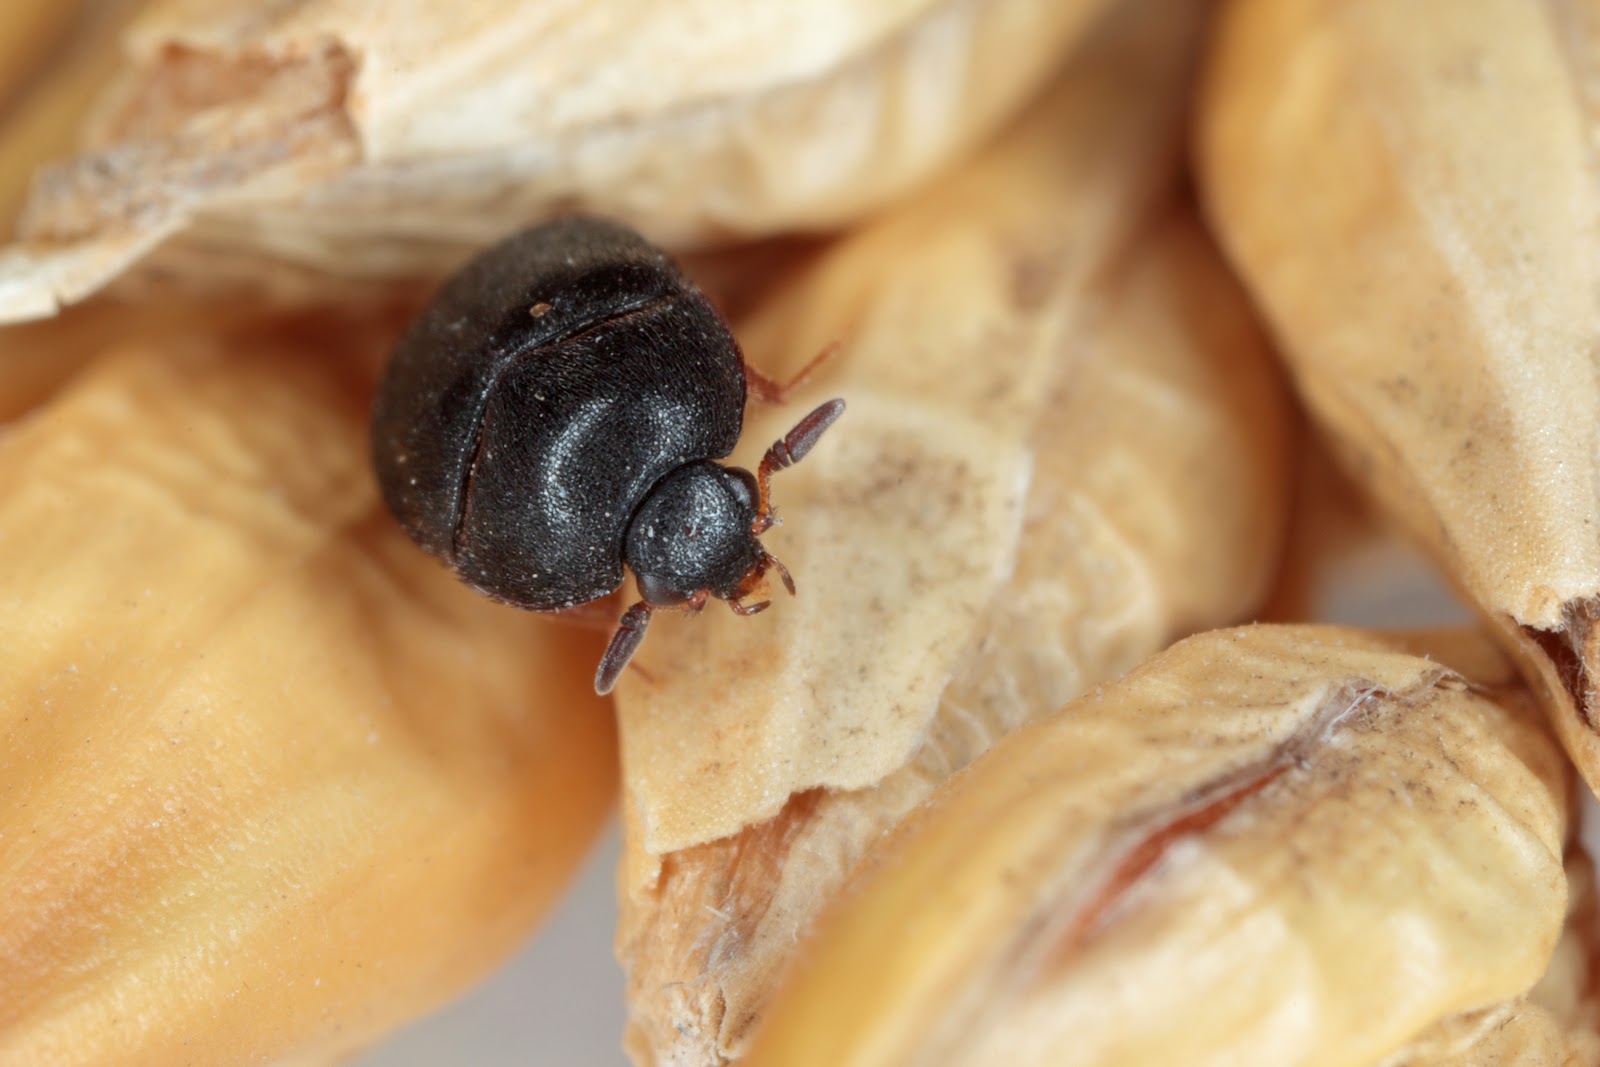 A black beetle perched on a heap of corn. Image depicts a potential pest problem and its solution